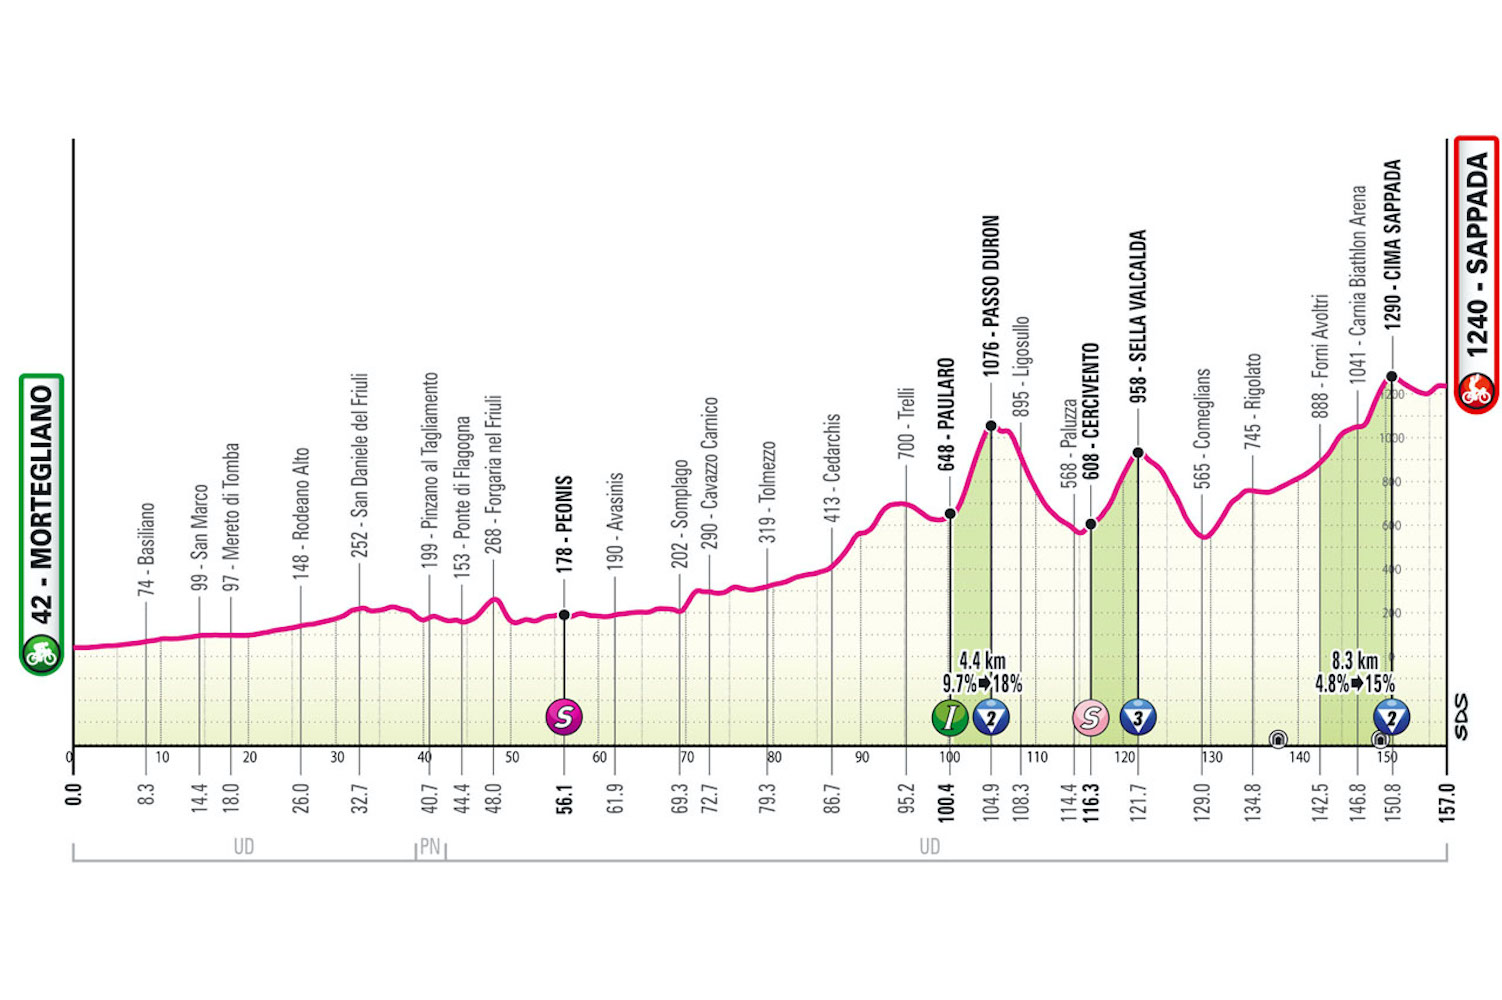 The profile of stage 19 of the Giro d'Italia.